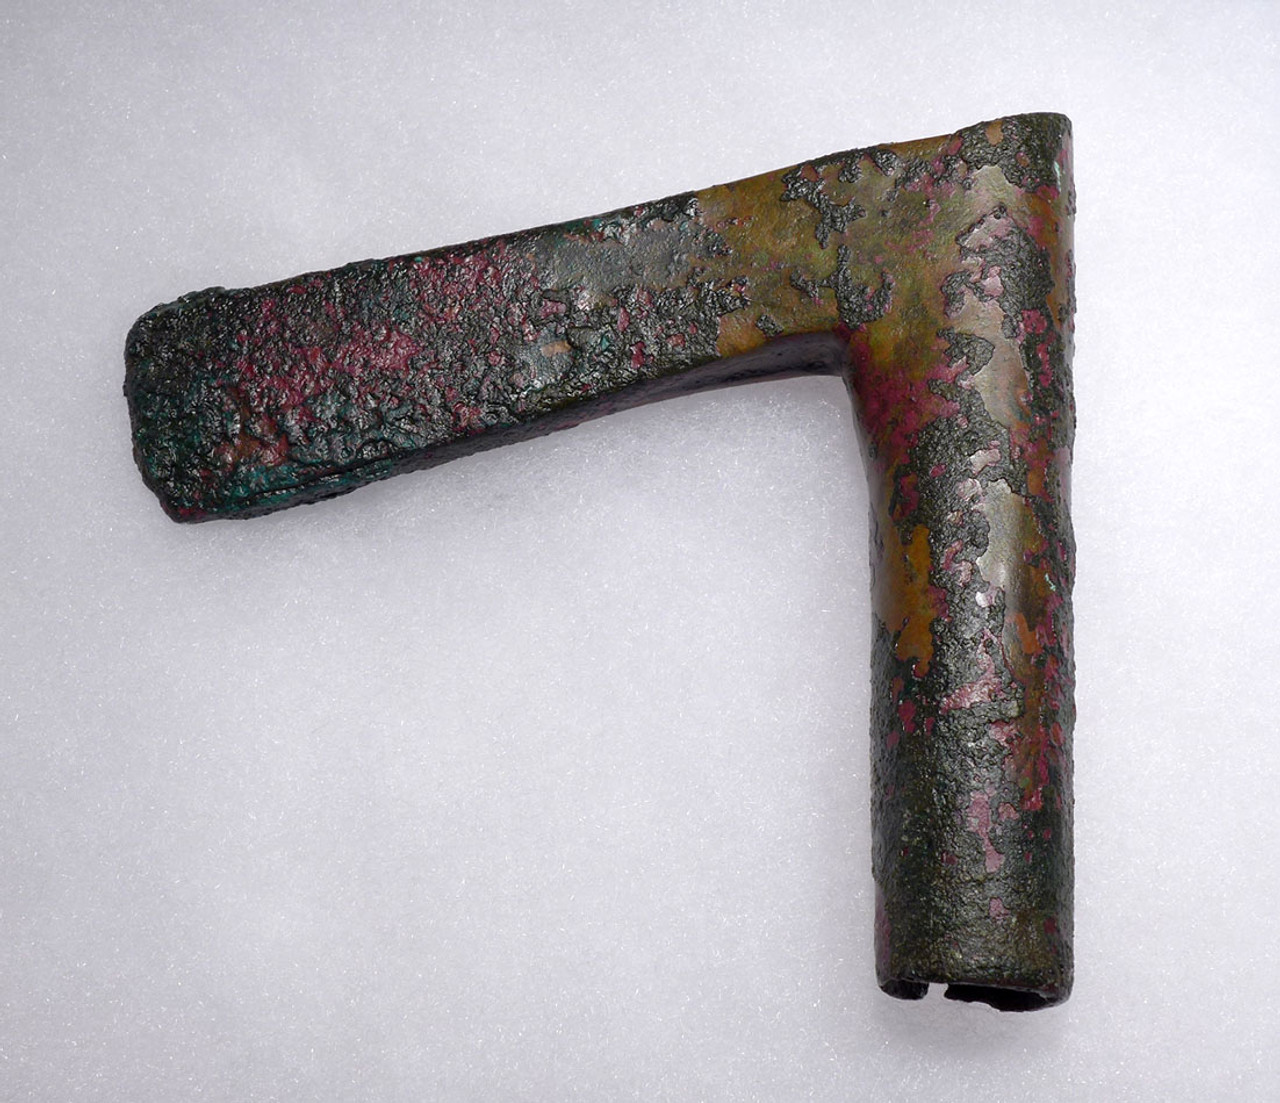 COLORFUL ARMOR-PIERCING LURISTAN BRONZE AXE FROM THE ANCIENT NEAR EAST  *LUR147